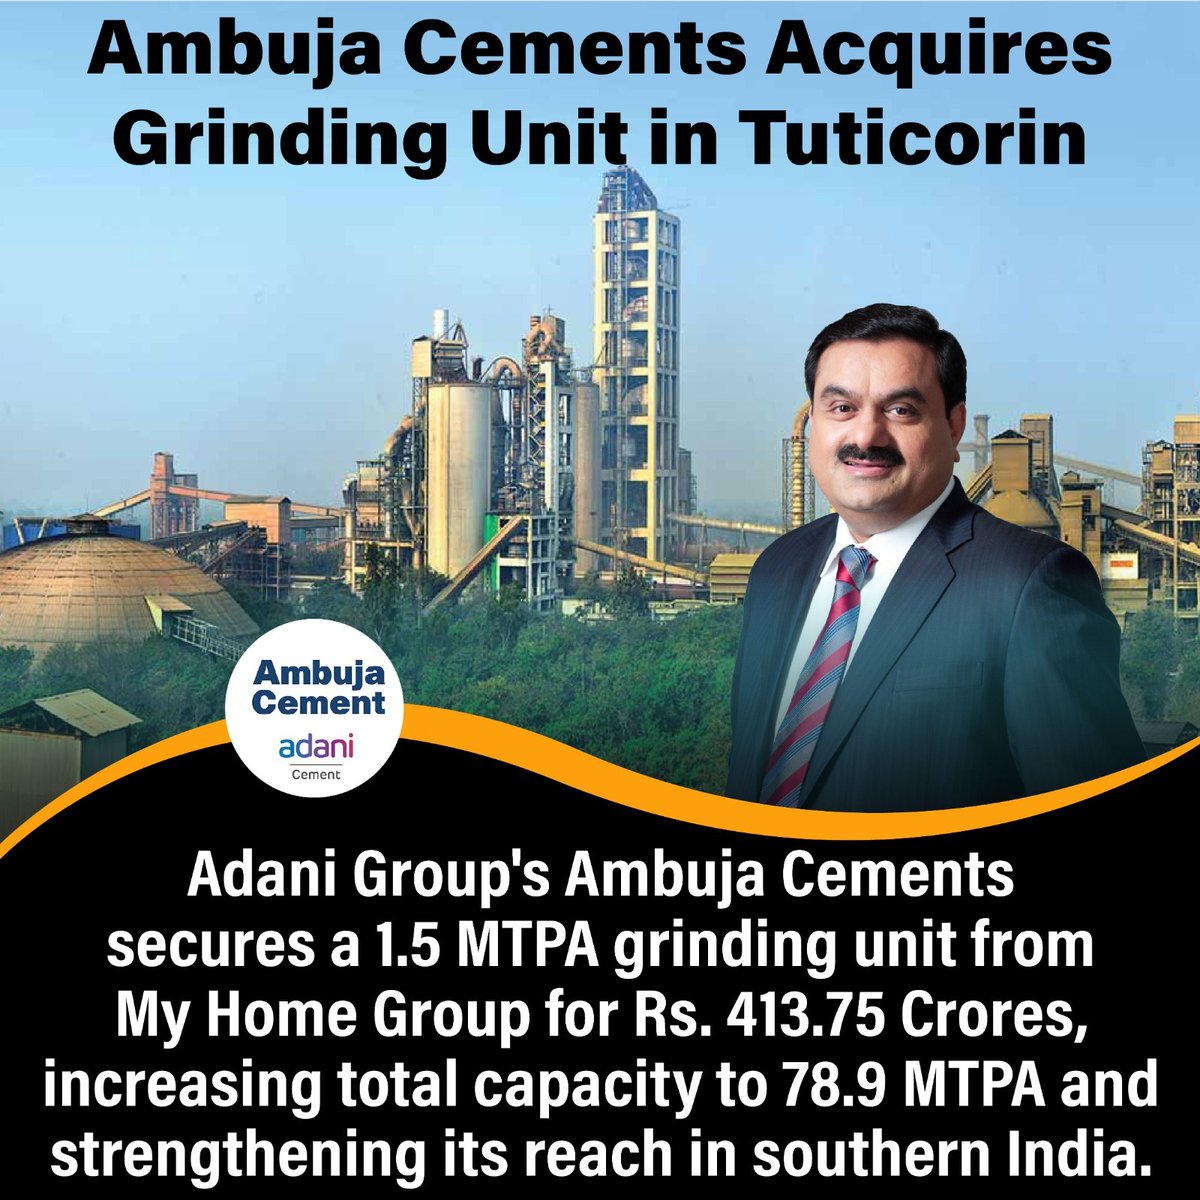 Ambuja Cements signs a definitive agreement to acquire a 1.5 MTPA Cement Grinding Unit in Tuticorin, Tamil Nadu from My Home Group, enhancing its southern market presence. #TamilNadu #AdaniGroup #HomeGroup #Adani